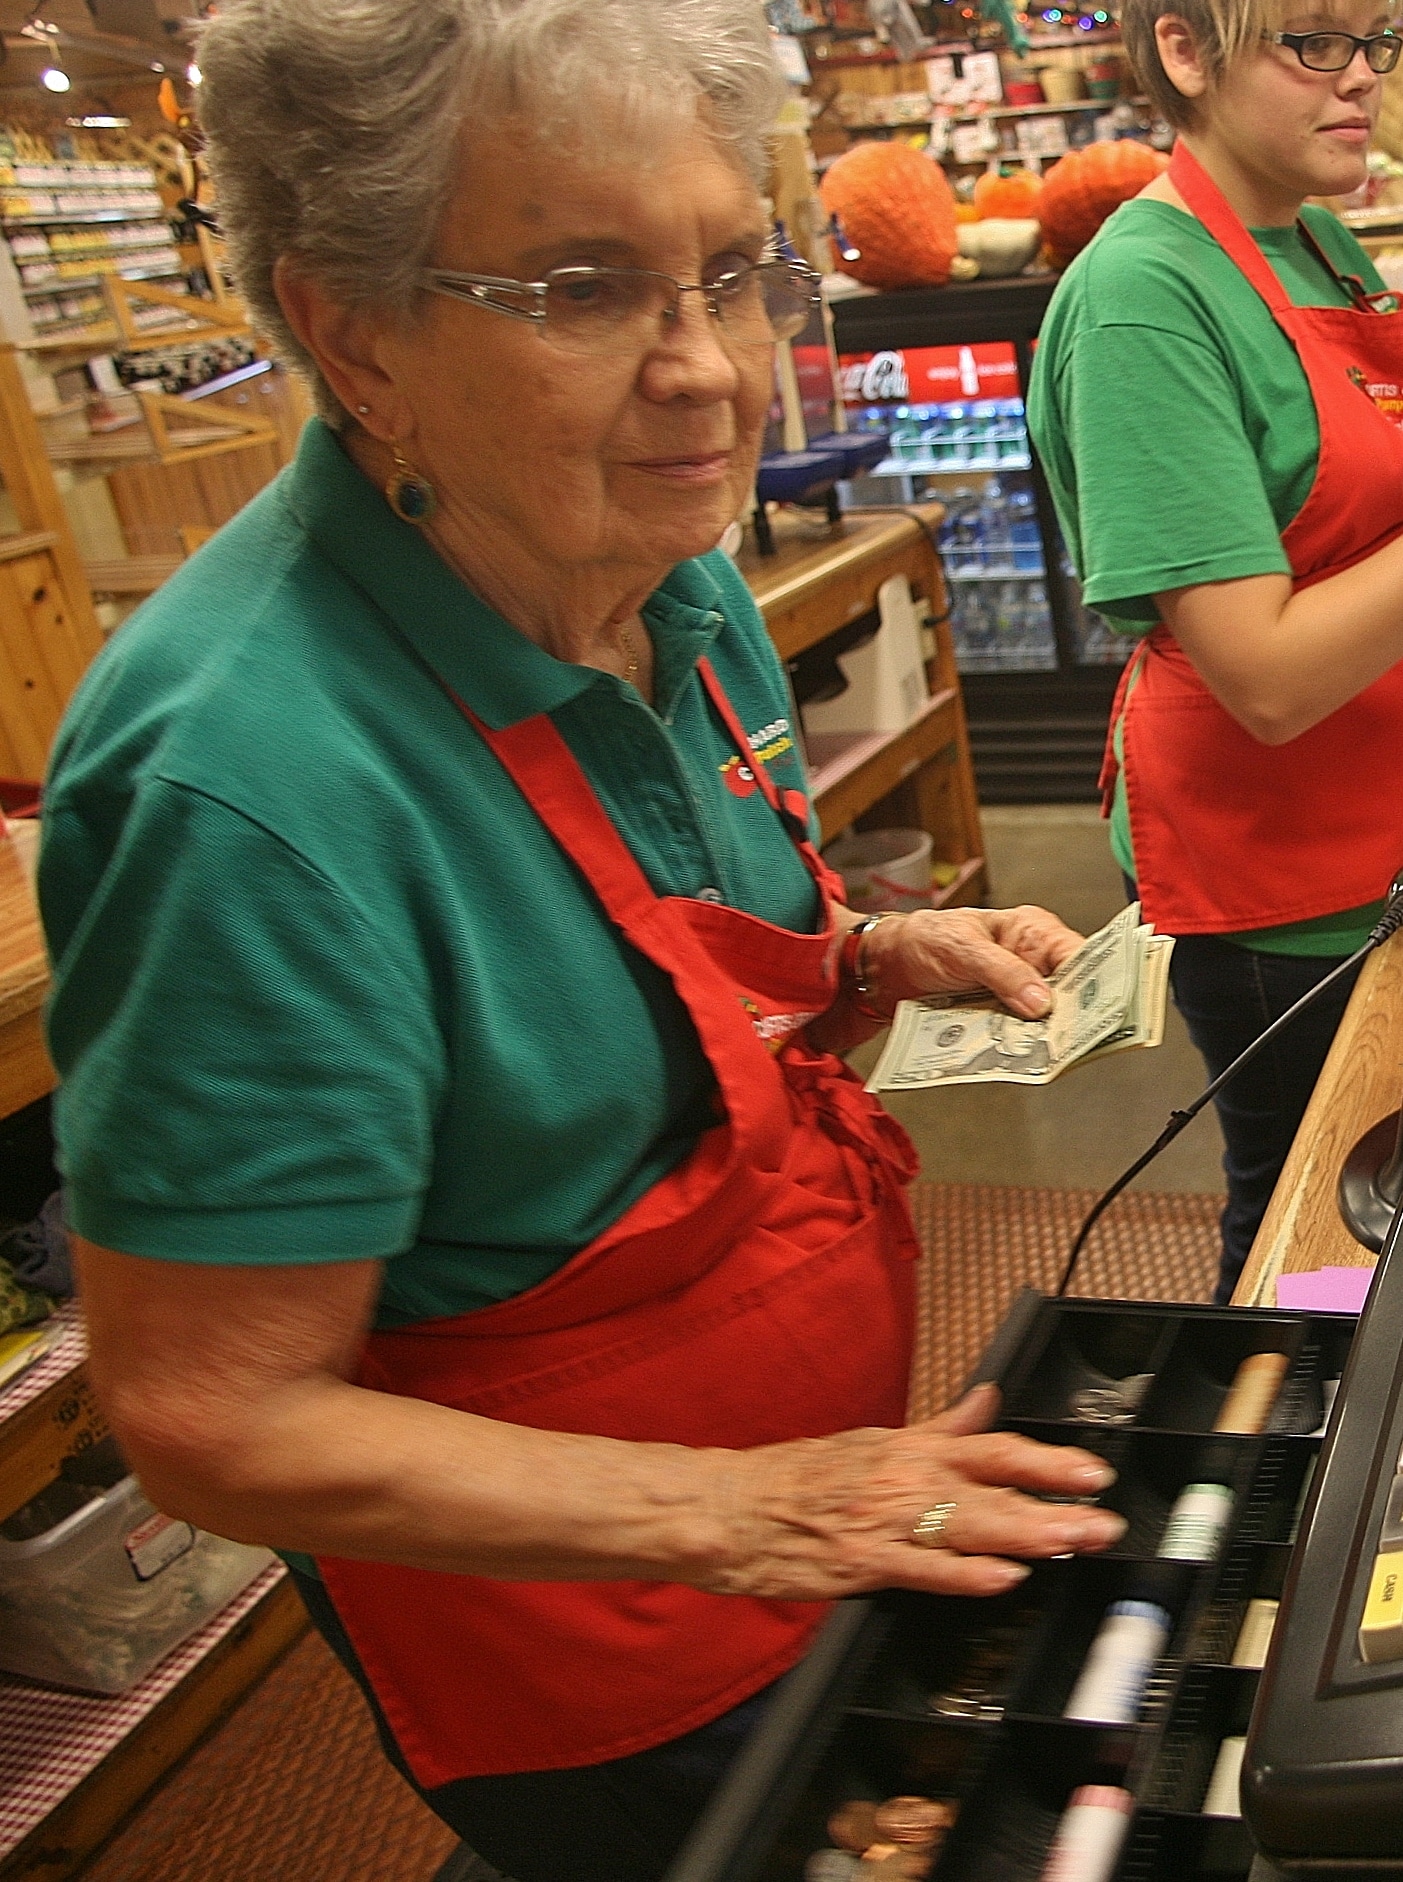 Image of Curtis Orchard Employee grabbing change for customer.